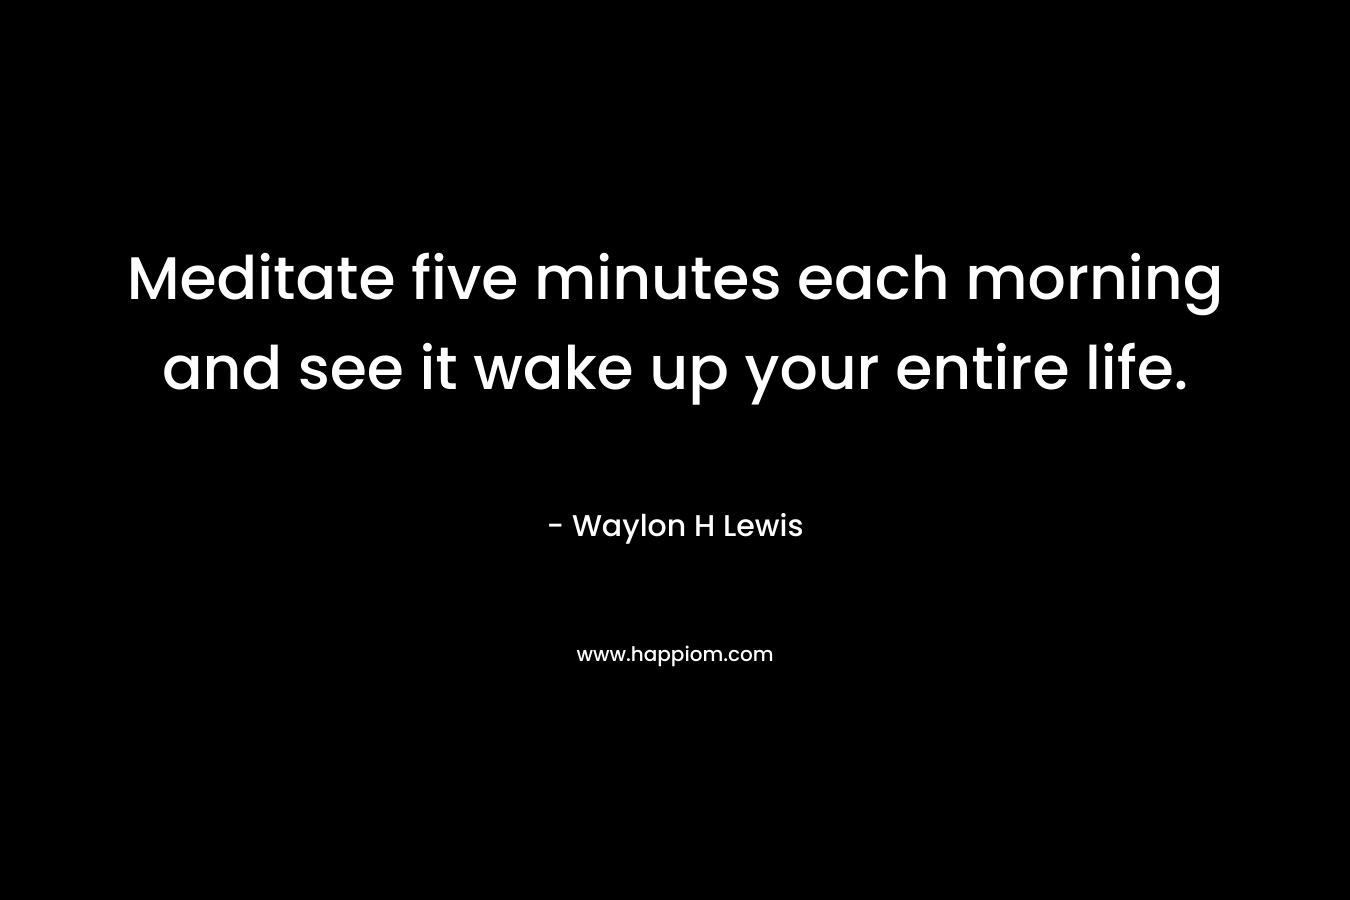 Meditate five minutes each morning and see it wake up your entire life.